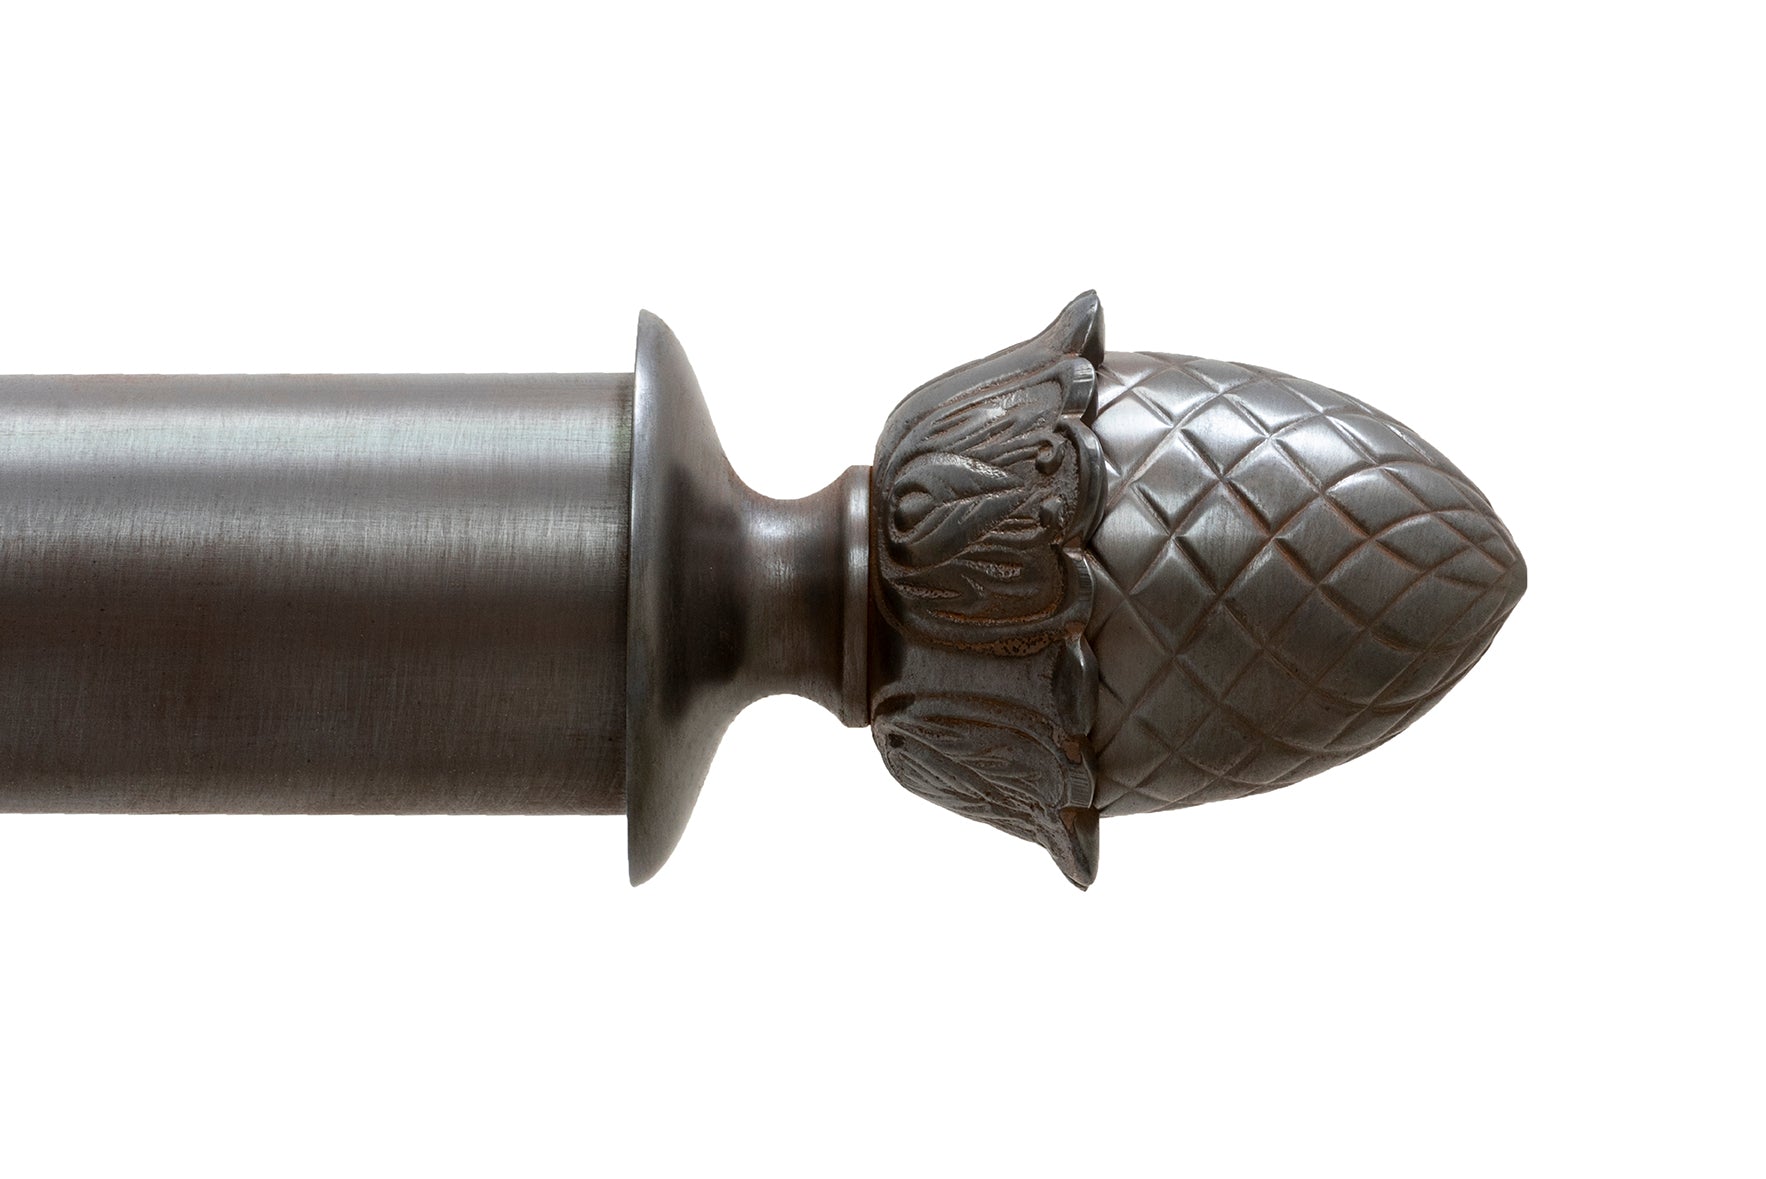 Tillys Classic Pineapple Finial Curtain Pole Set in Bronze